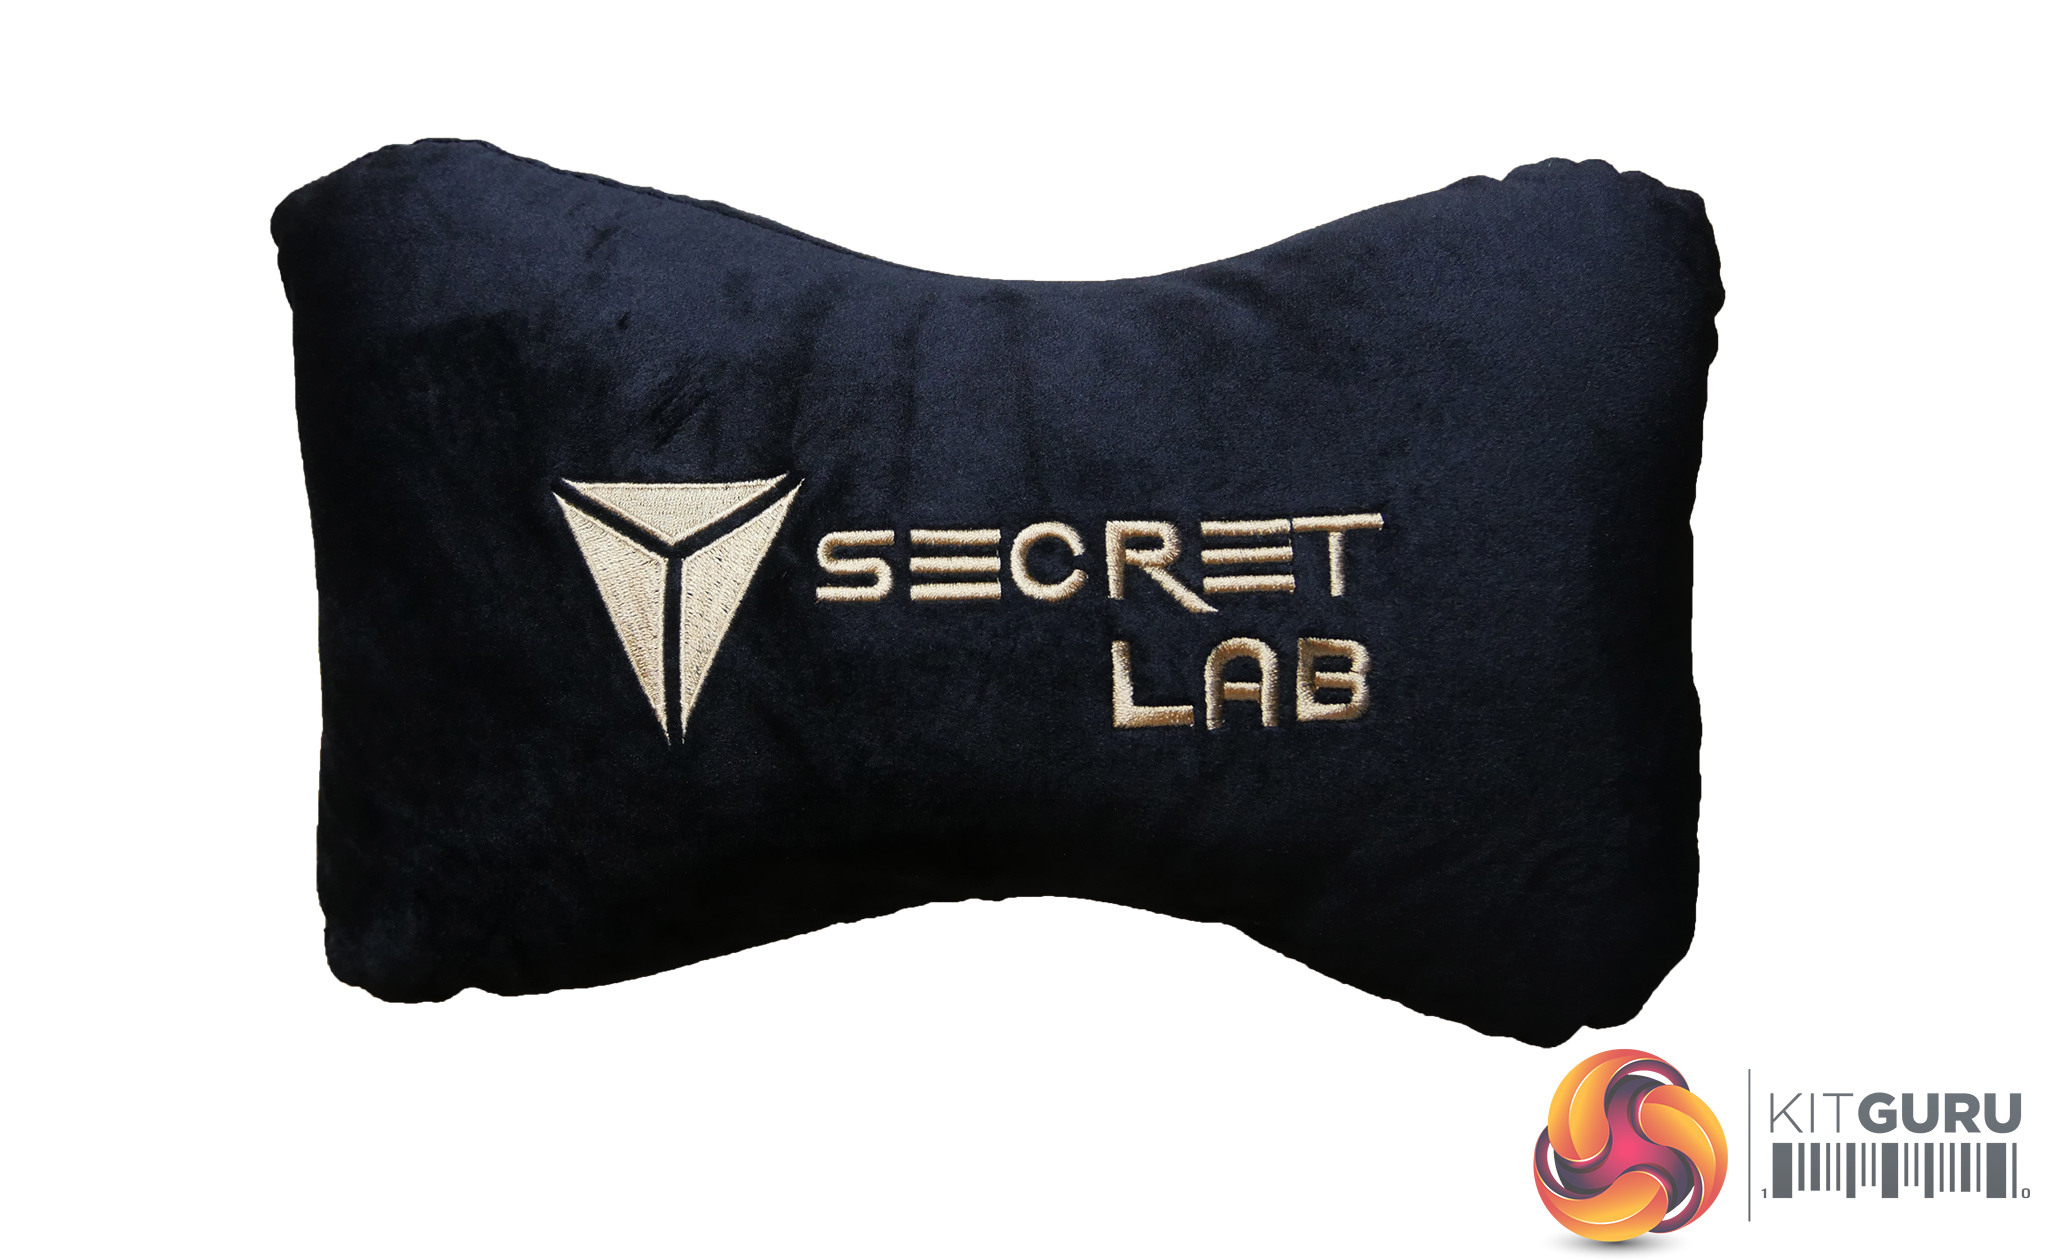 gaming chair pillow